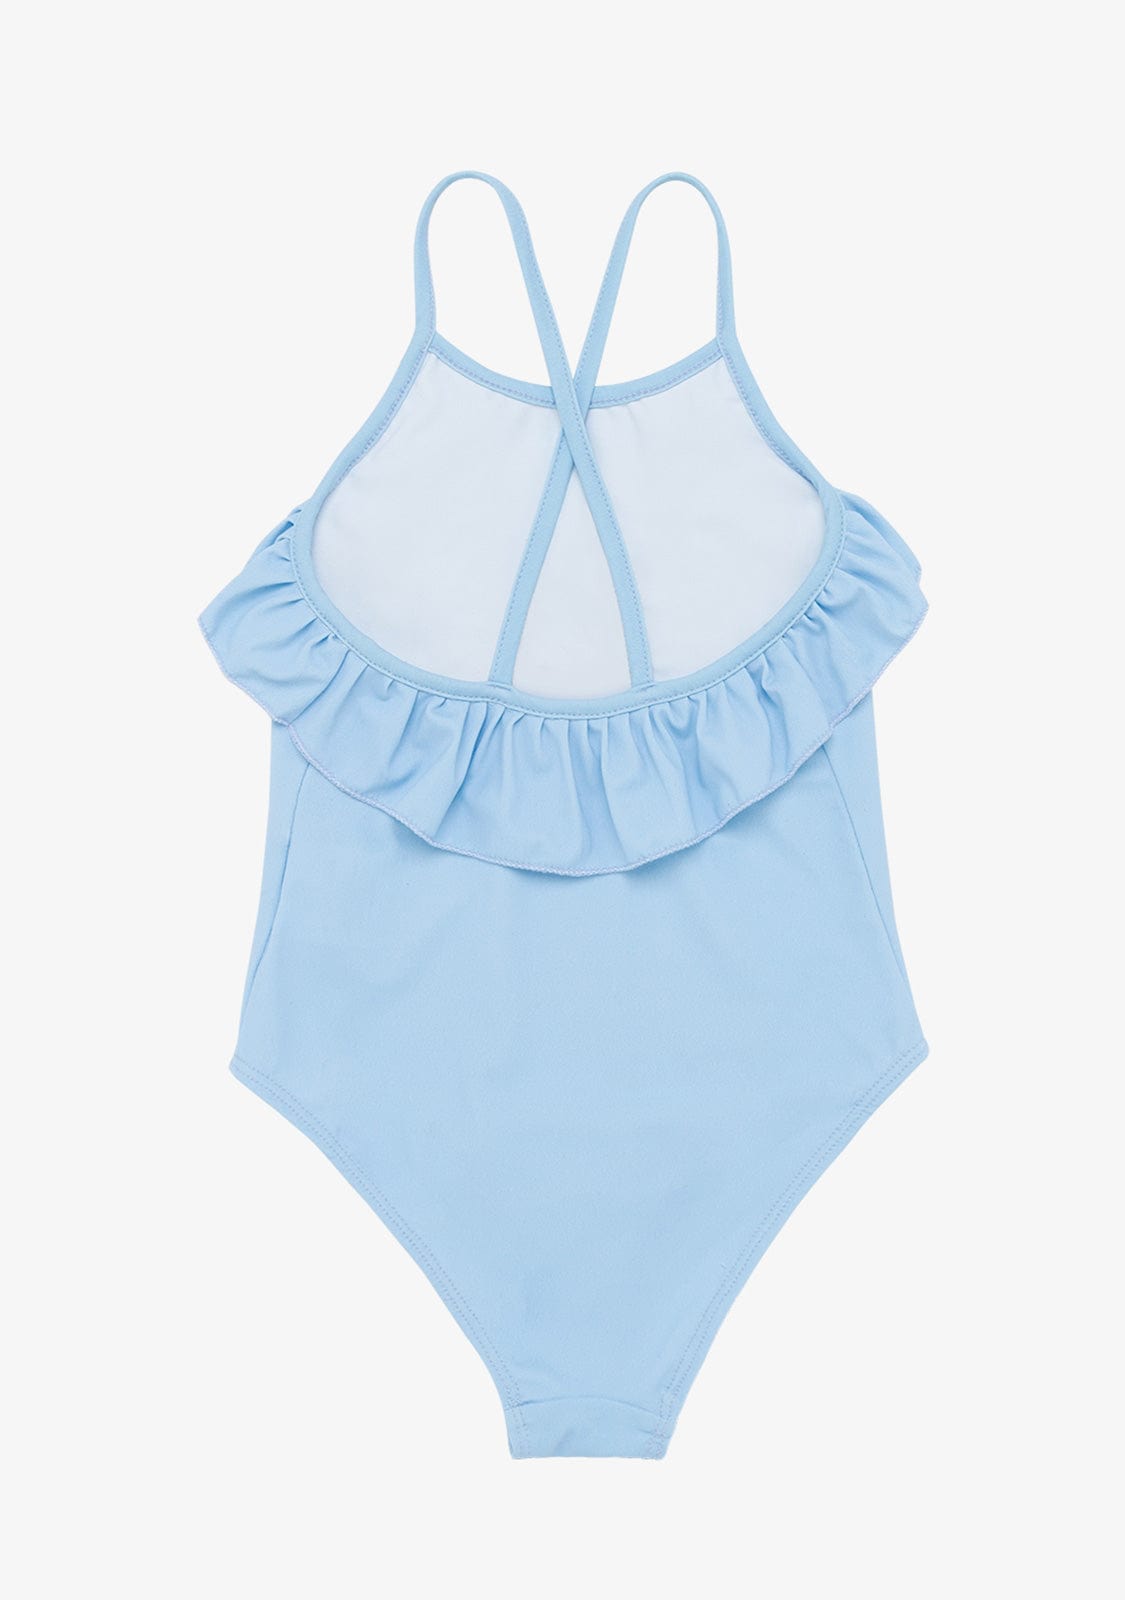 CONGUITOS TEXTIL Clothing Girl's Bluish Ruffled Swimsuit